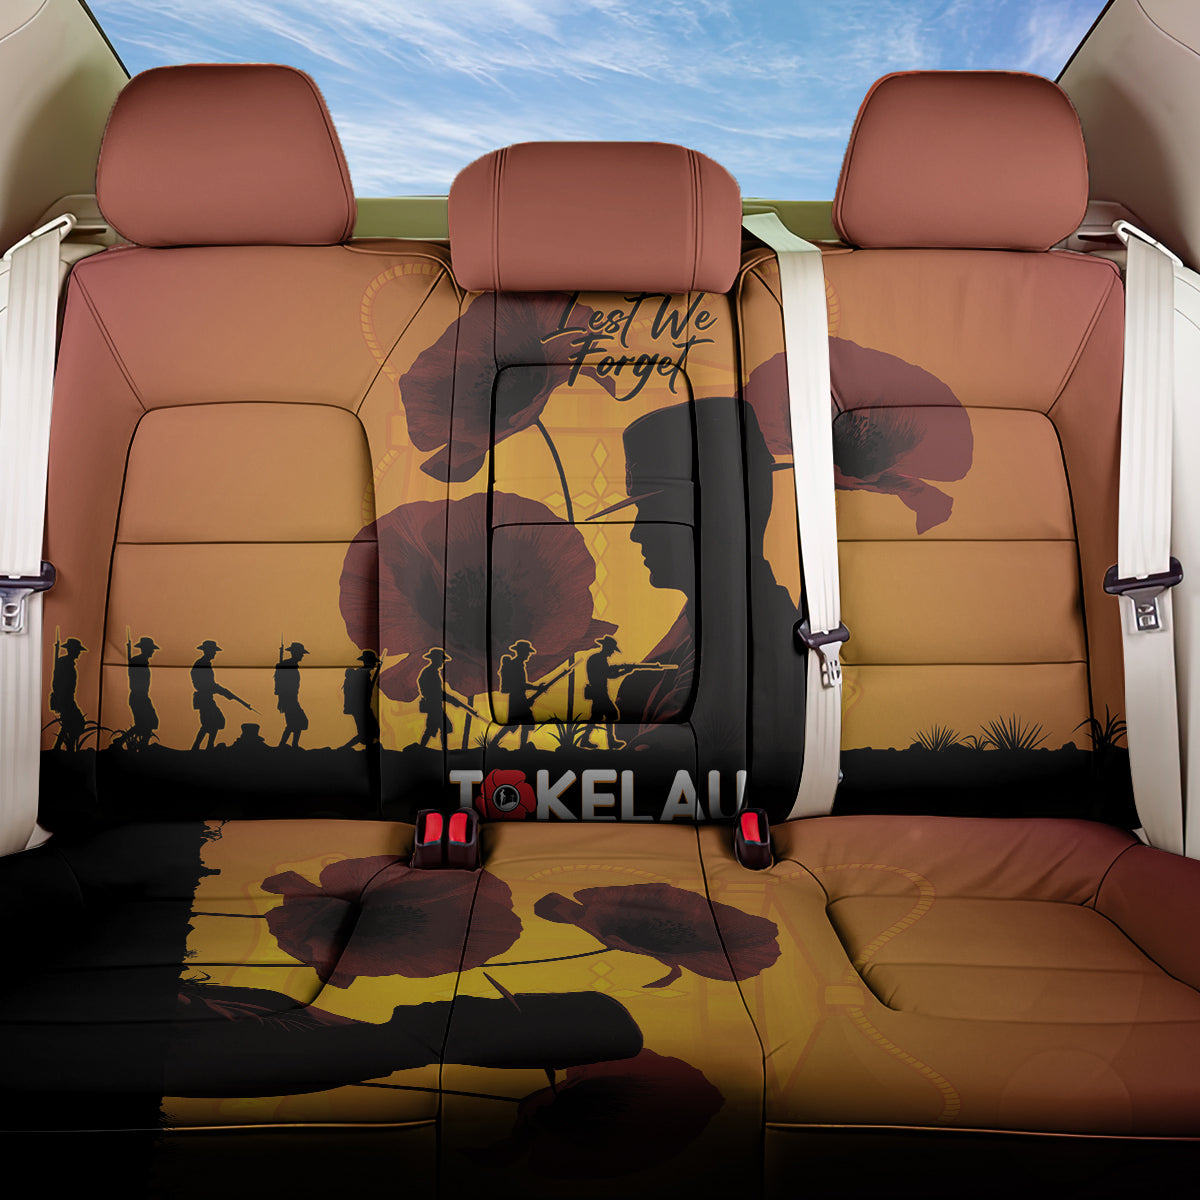 Tokelau ANZAC Day Back Car Seat Cover Camouflage With Poppies Lest We Forget LT14 One Size Yellow - Polynesian Pride